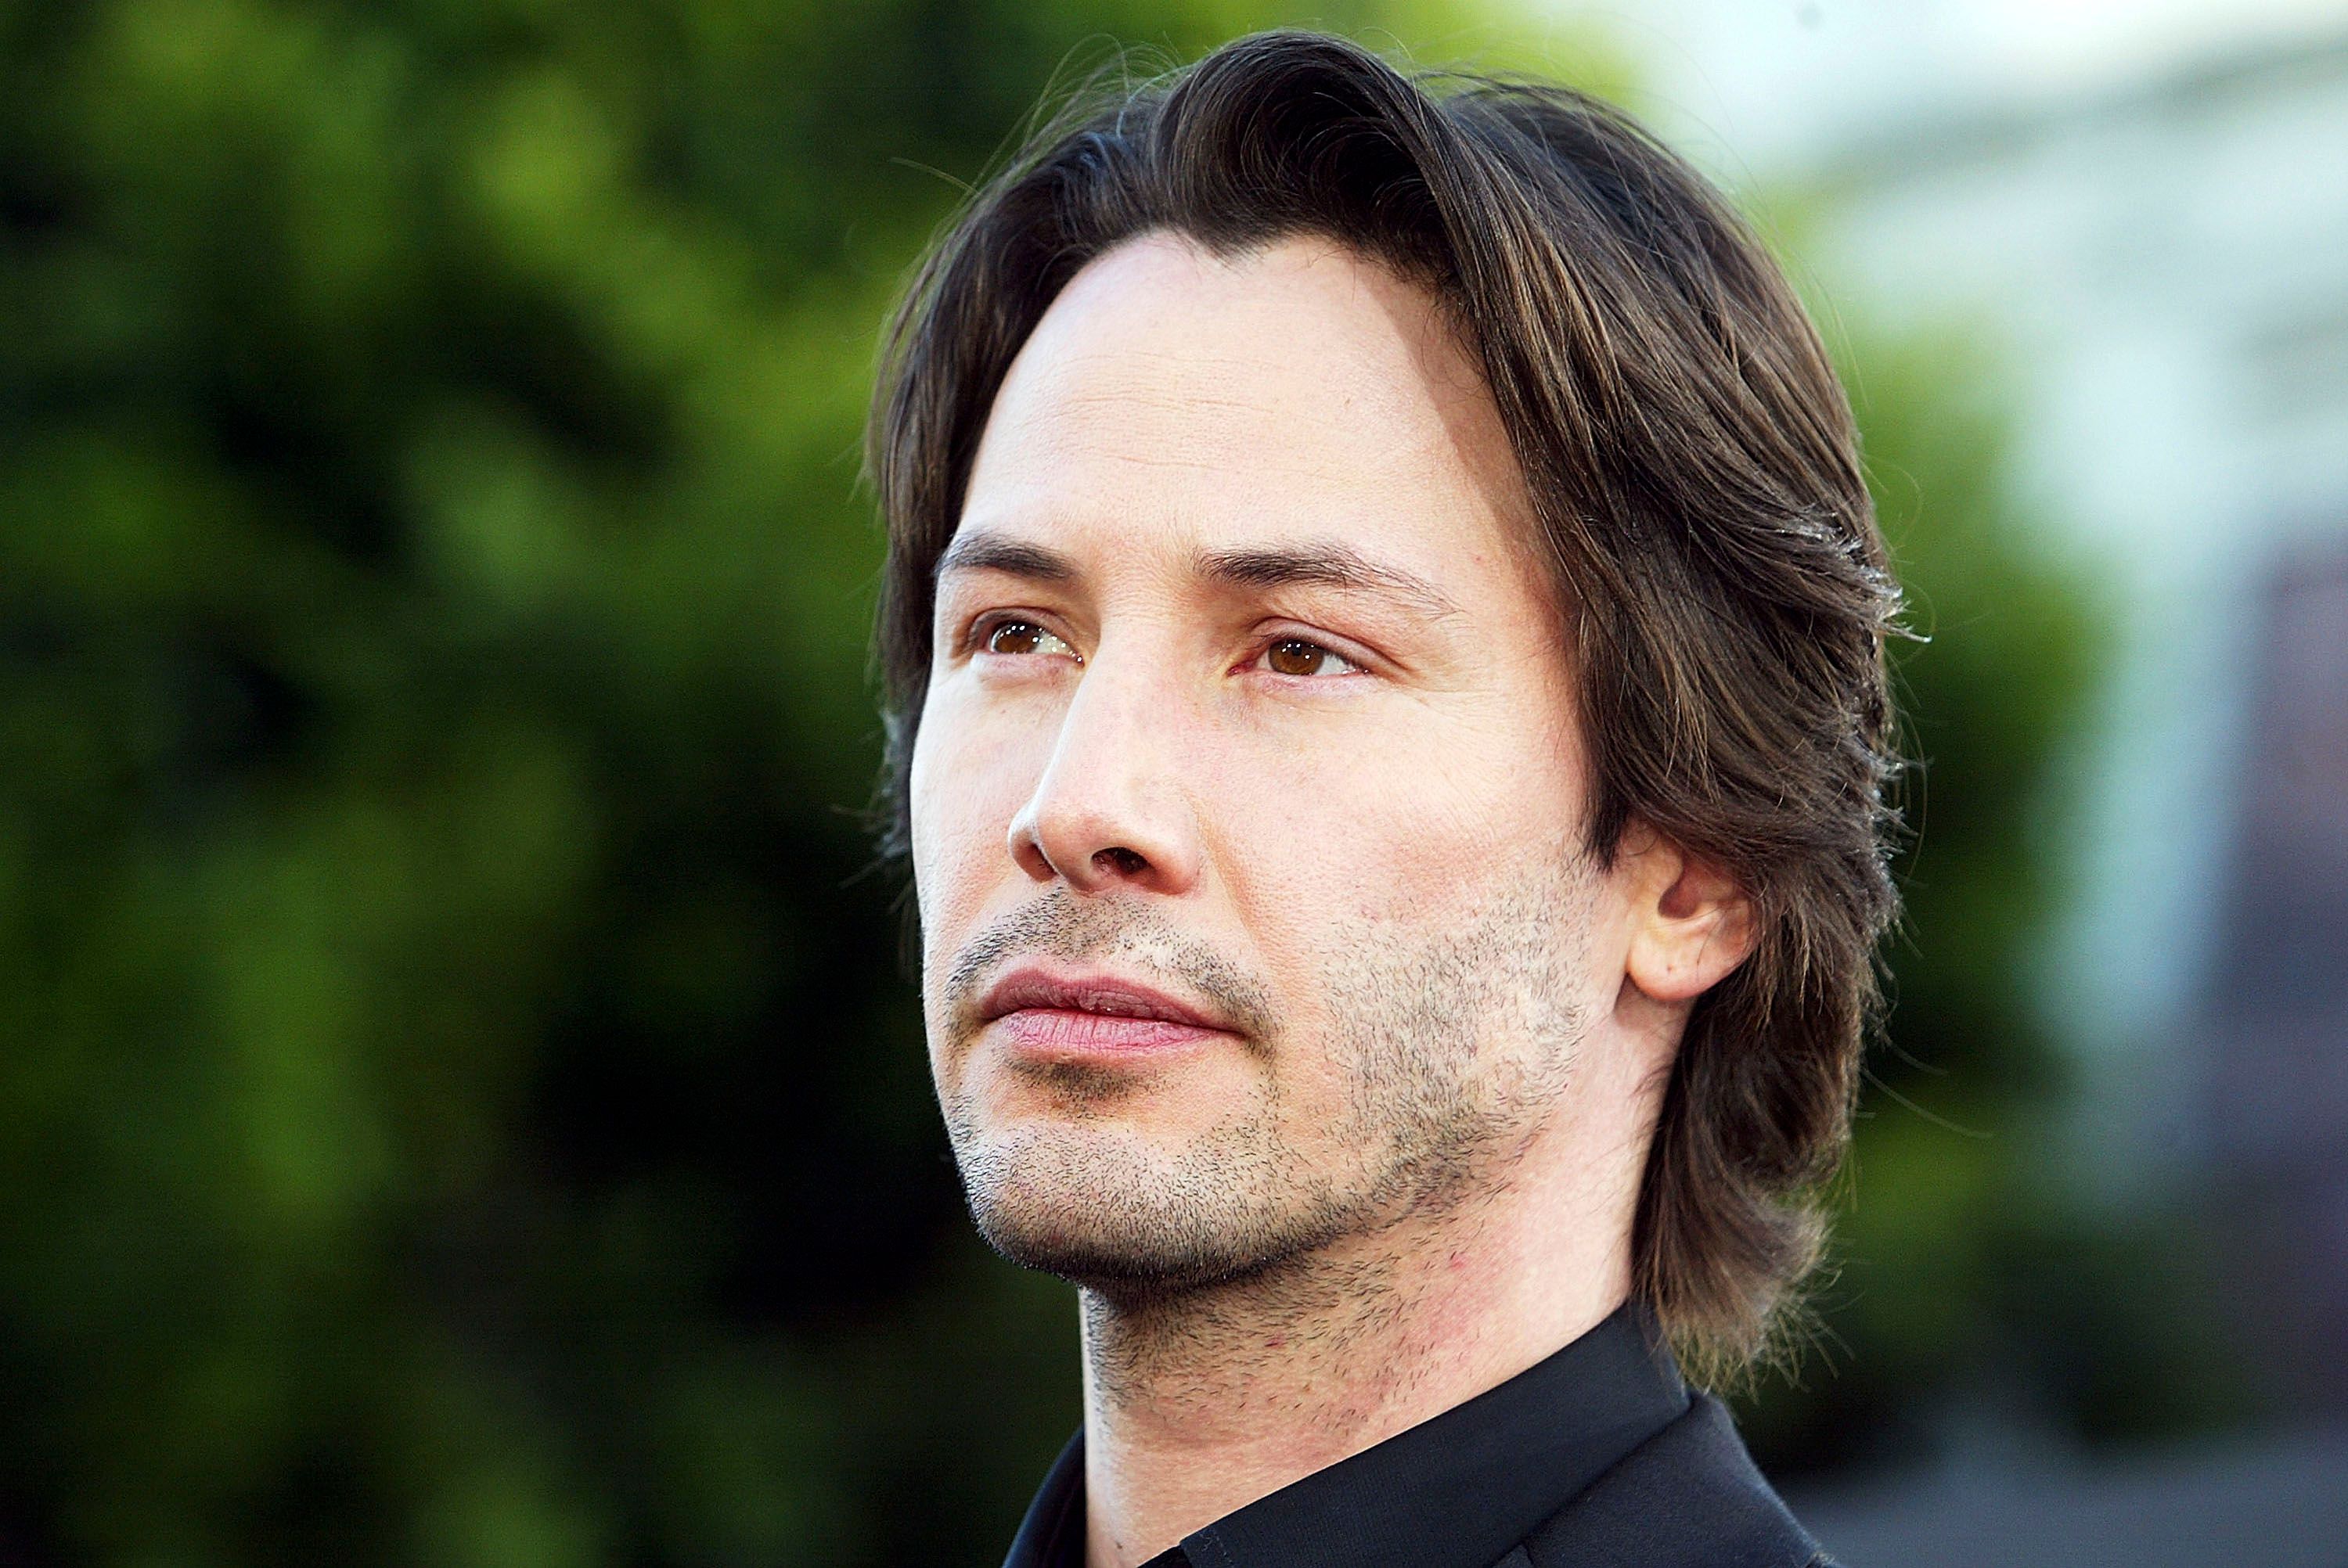 Keanu Reeves at the premiere of "The Matrix Reloaded" at the Village Theater on May 7, 2003, in Los Angeles, California | Photo: Kevin Winter/Getty Images